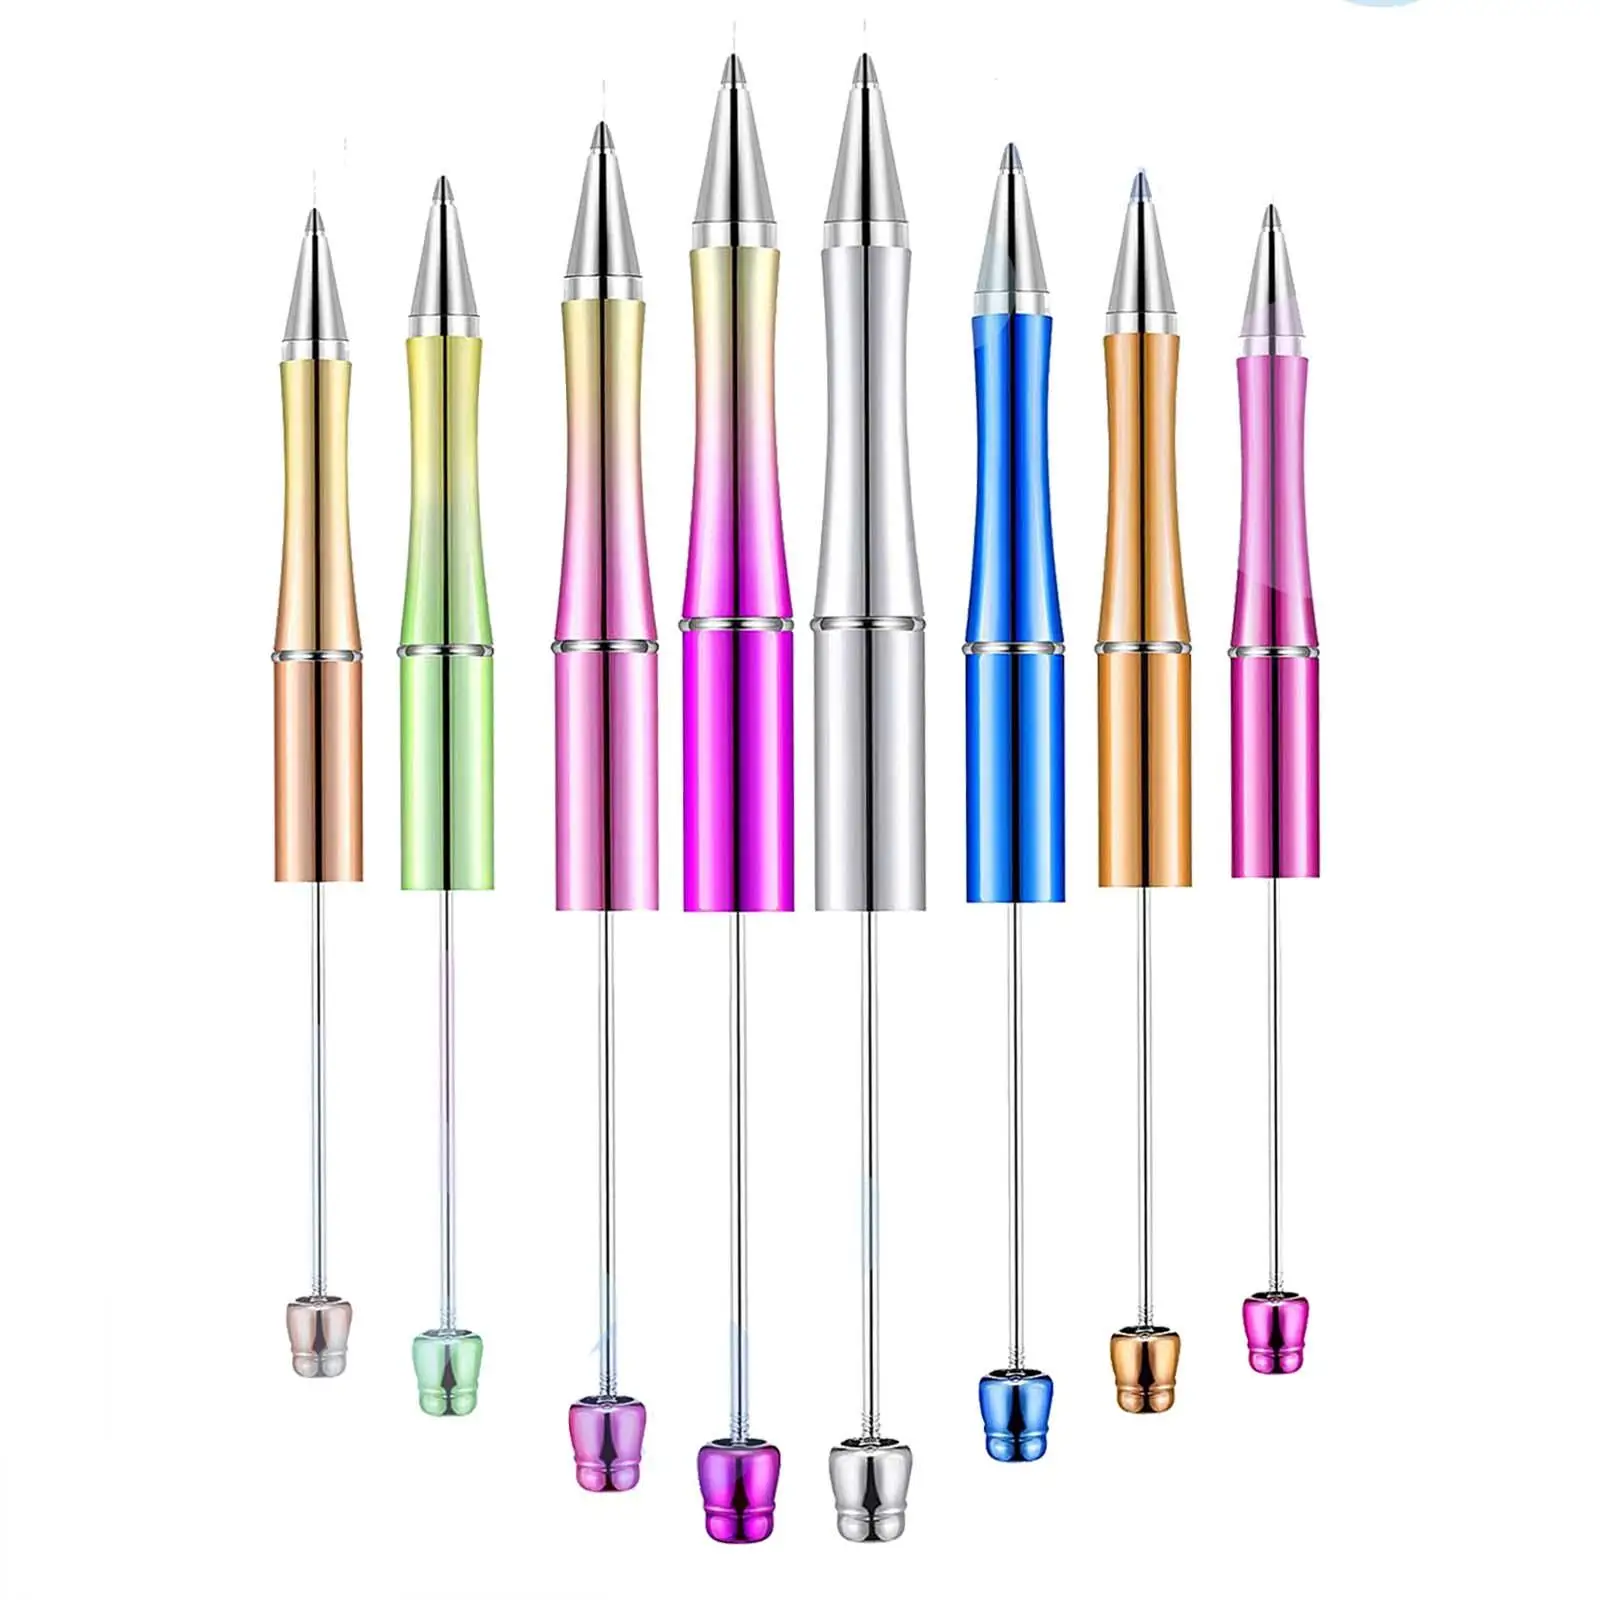 8x Rollerball Pen Creative 1mm Portable Printable Ballpoint Pen Beadable Pens for Drawing Taking Notes Exam Spare Gift Classroom